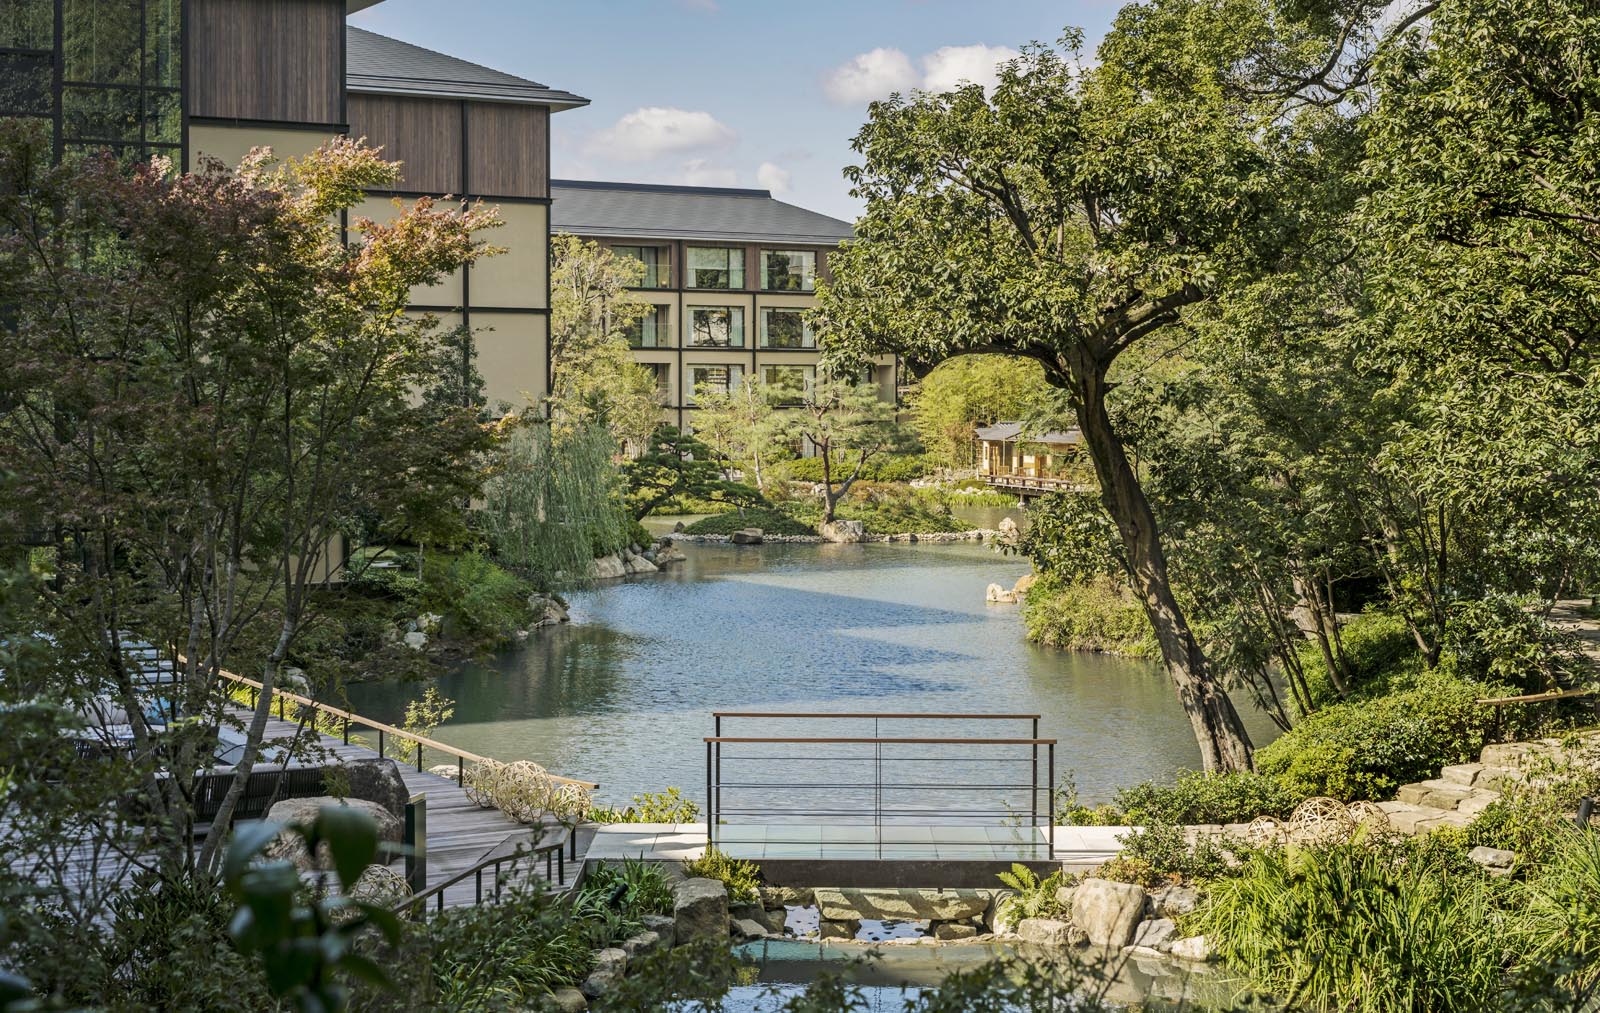 Four Seasons Hotel Kyoto features a 12th-century pond garden with cherry and maple trees